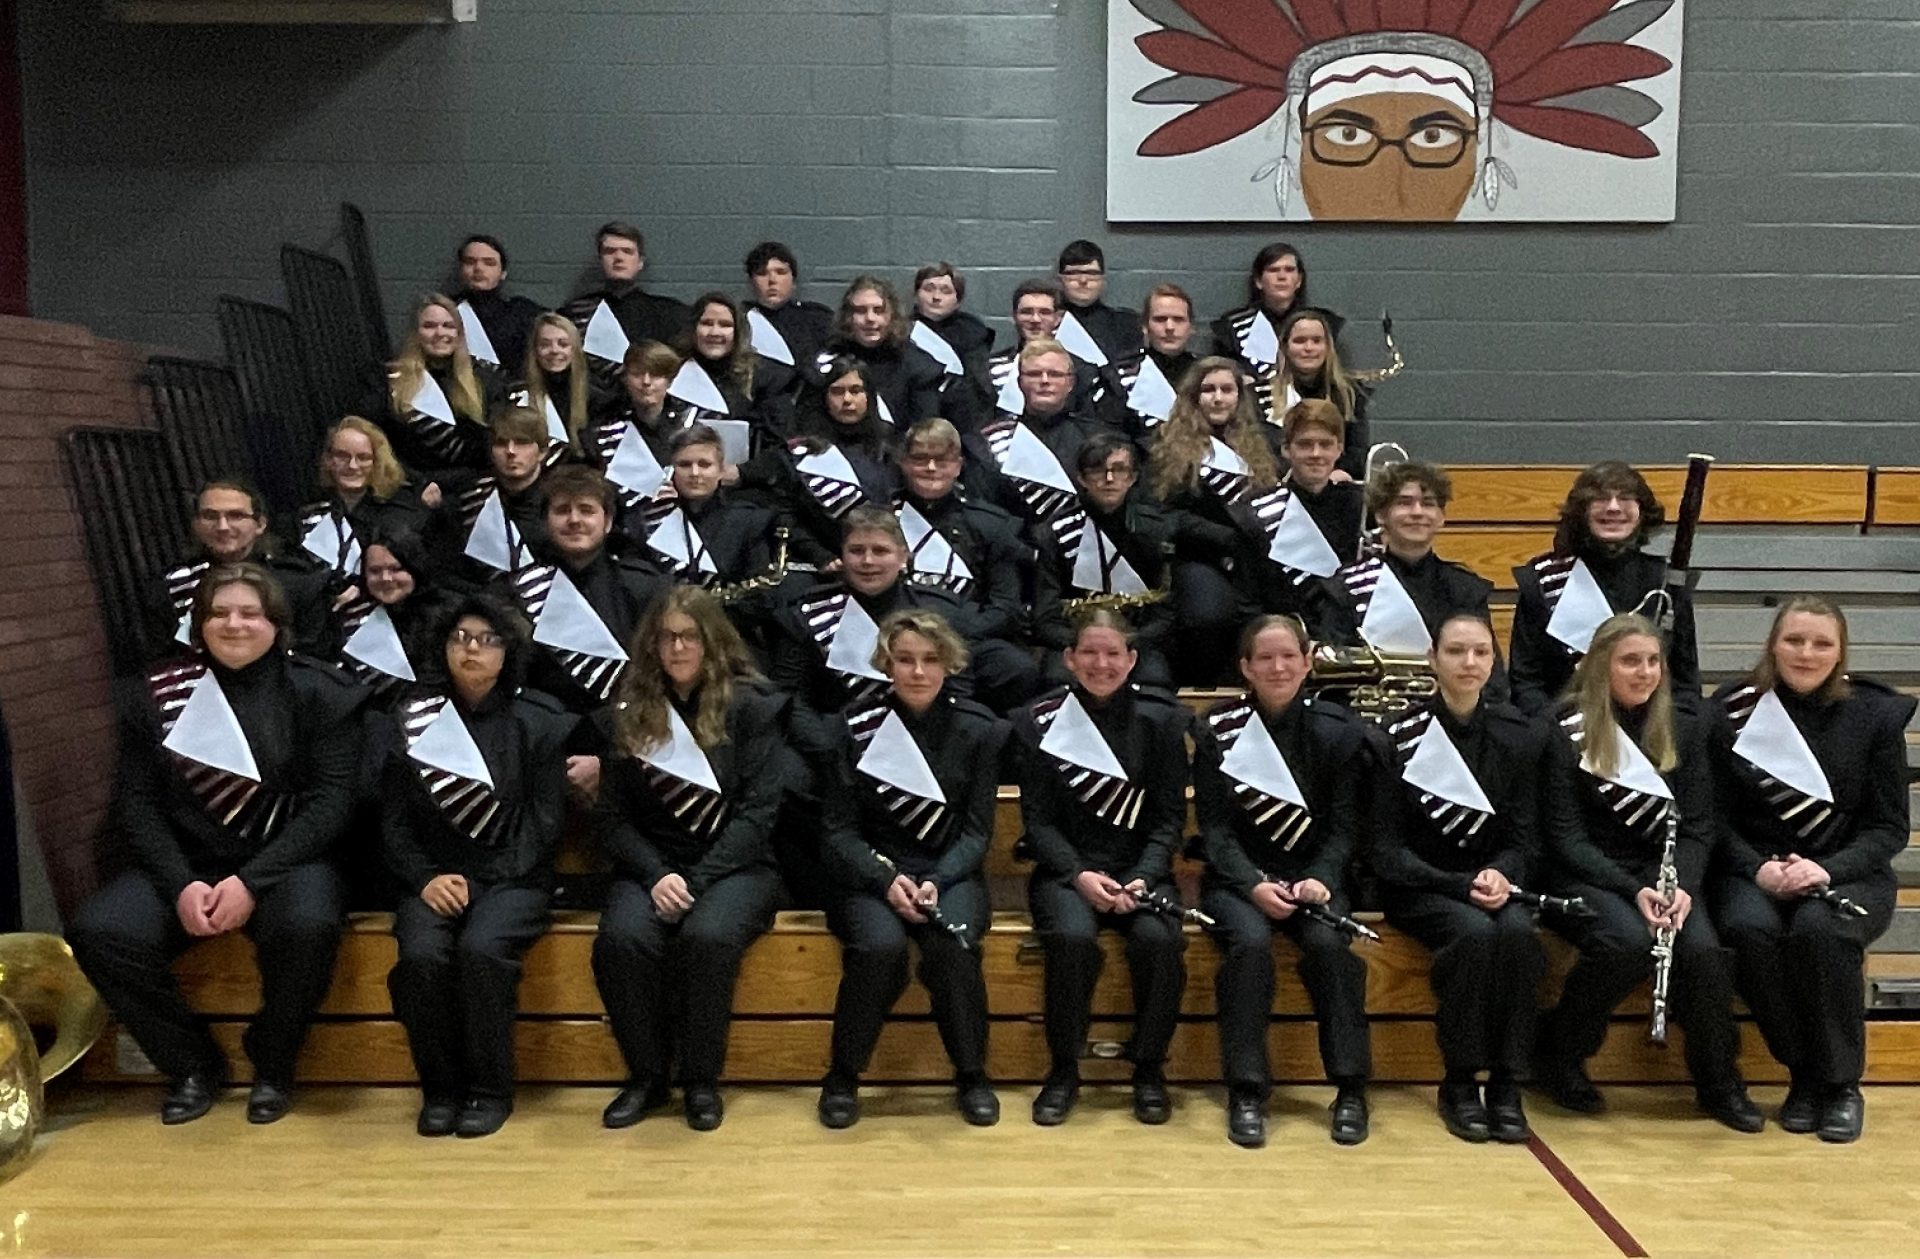 West Point High School band fourth in Cullman County to score